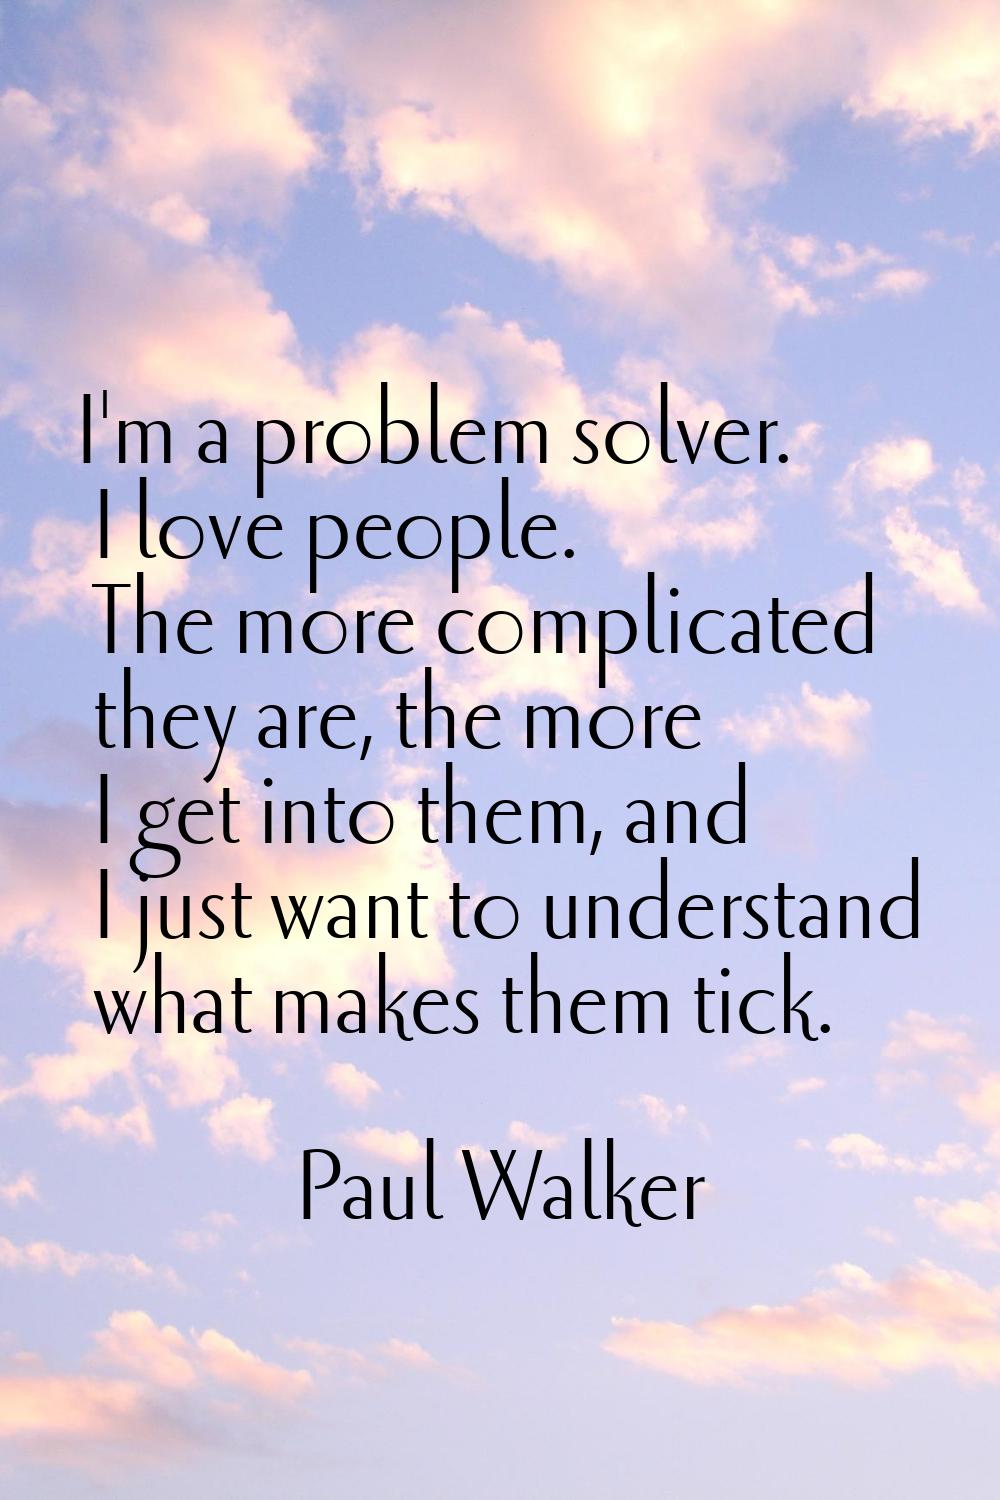 I'm a problem solver. I love people. The more complicated they are, the more I get into them, and I